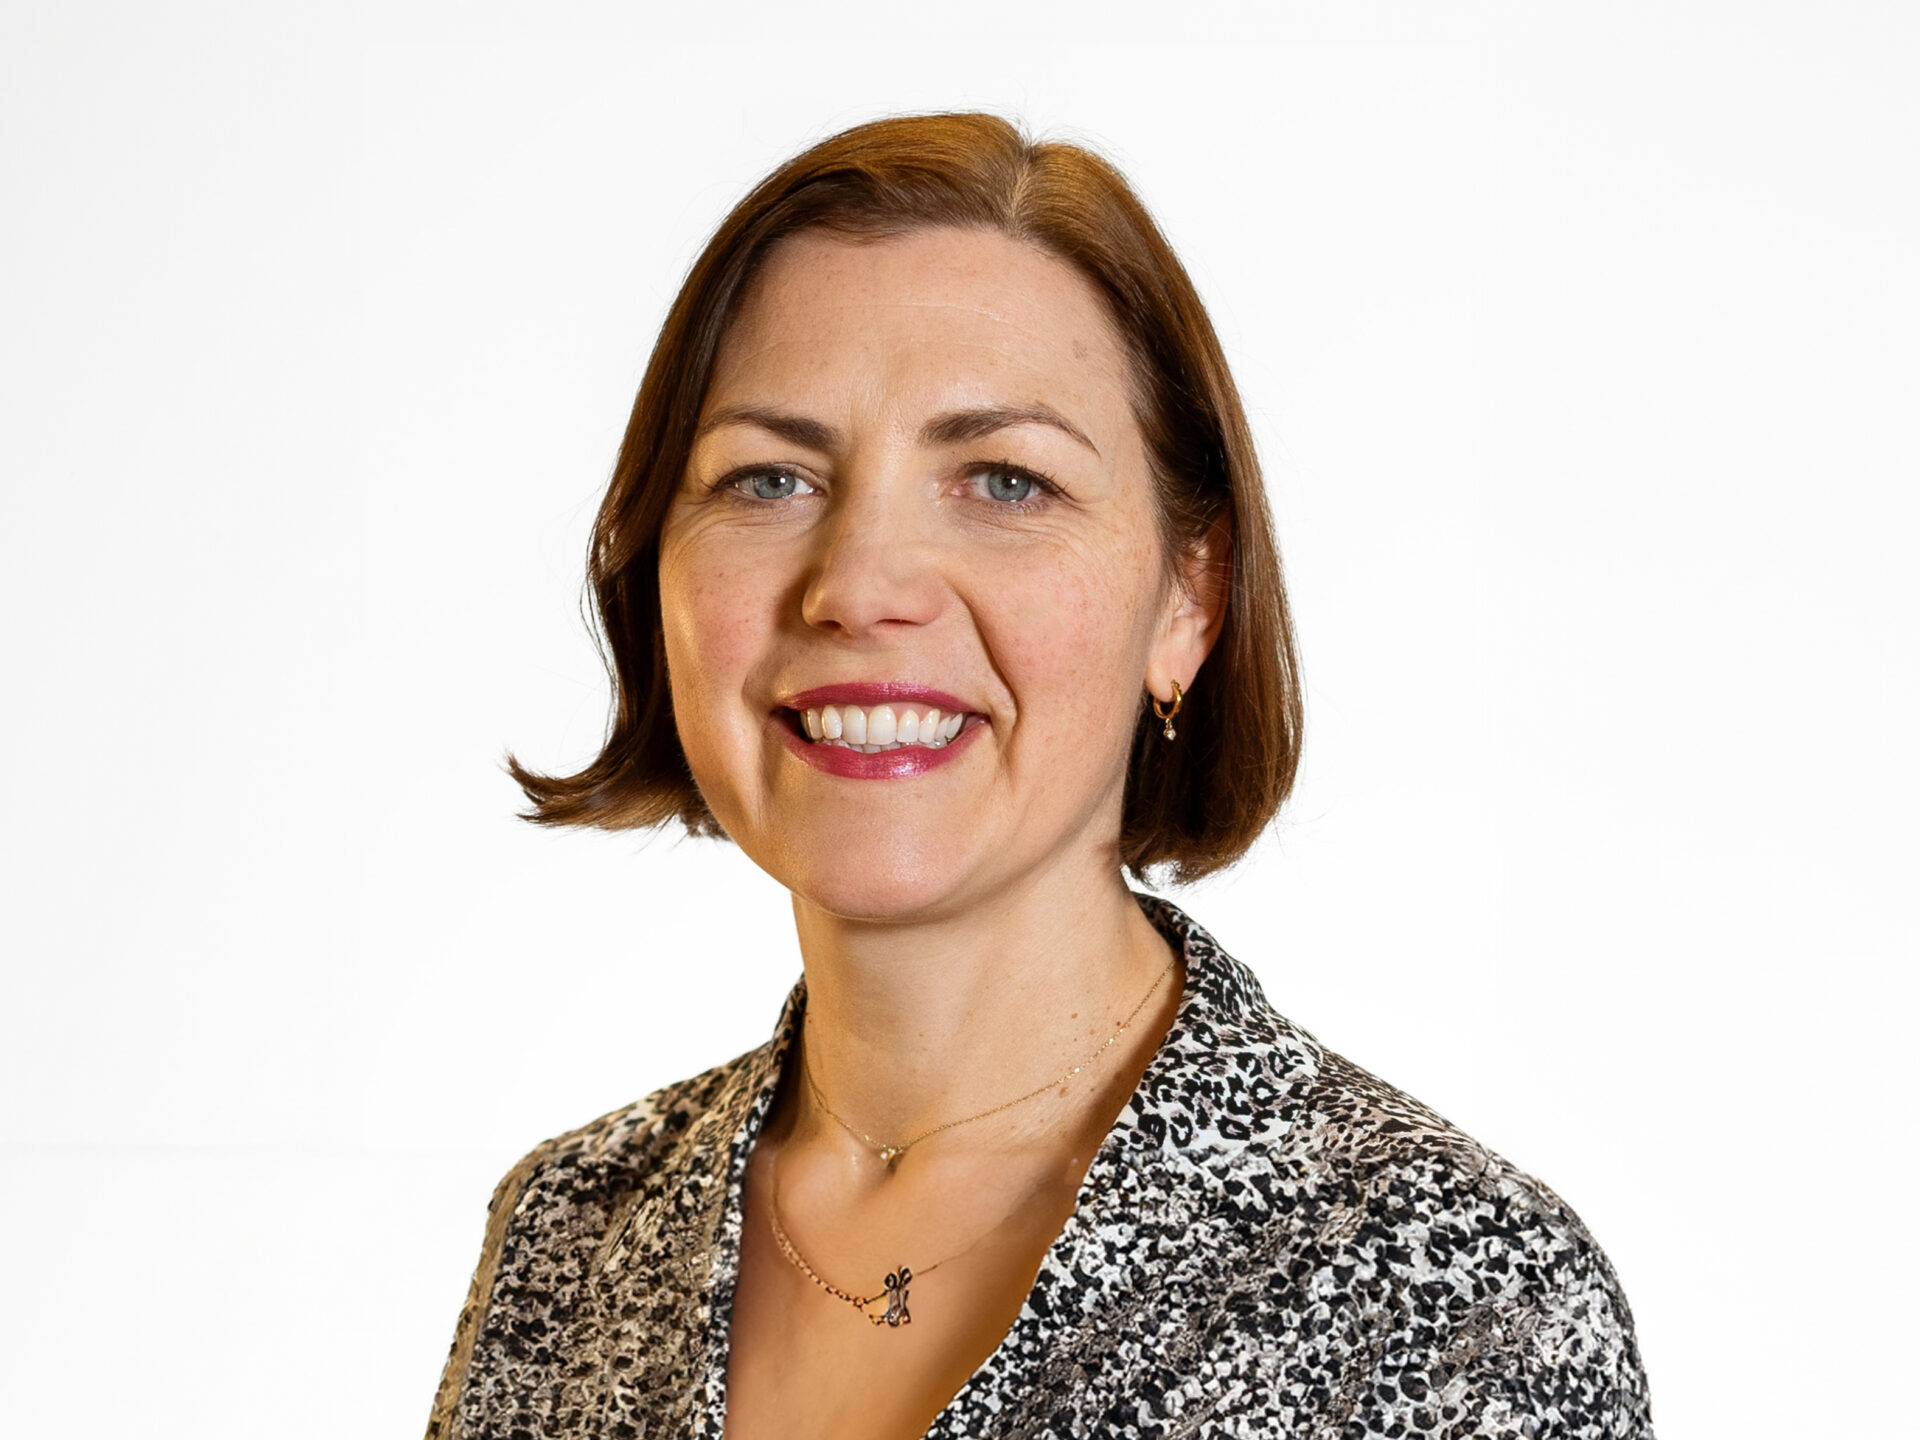 NICOLA KANE, STEER | Kane is one of the leading transport strategists in the North West, having previously been head of strategic planning, insight, and innovation at Transport for Greater Manchester. 